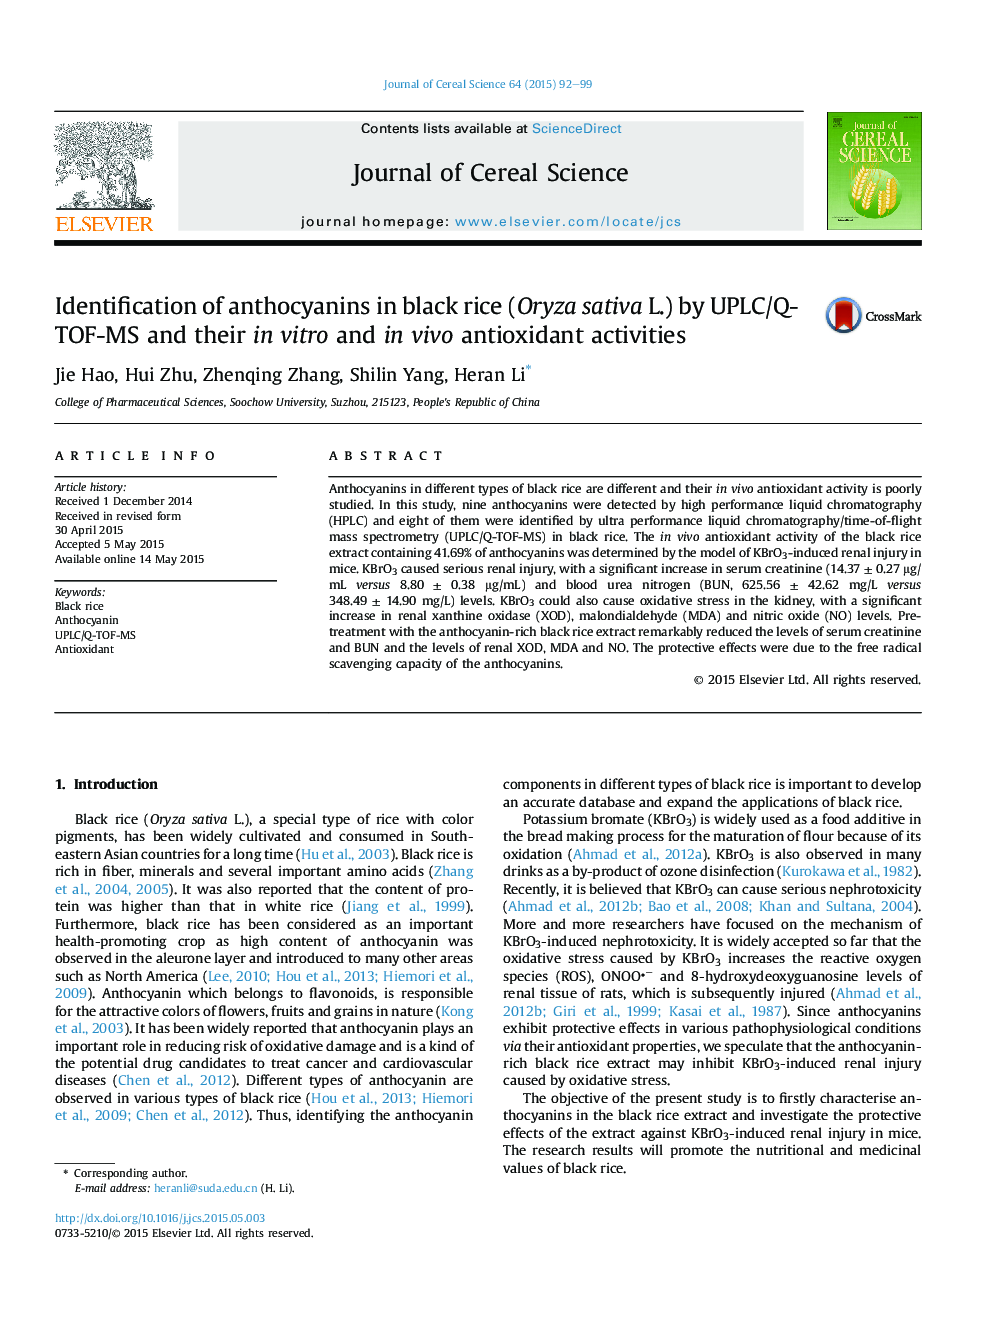 Identification of anthocyanins in black rice (Oryza sativa L.) by UPLC/Q-TOF-MS and their in vitro and in vivo antioxidant activities